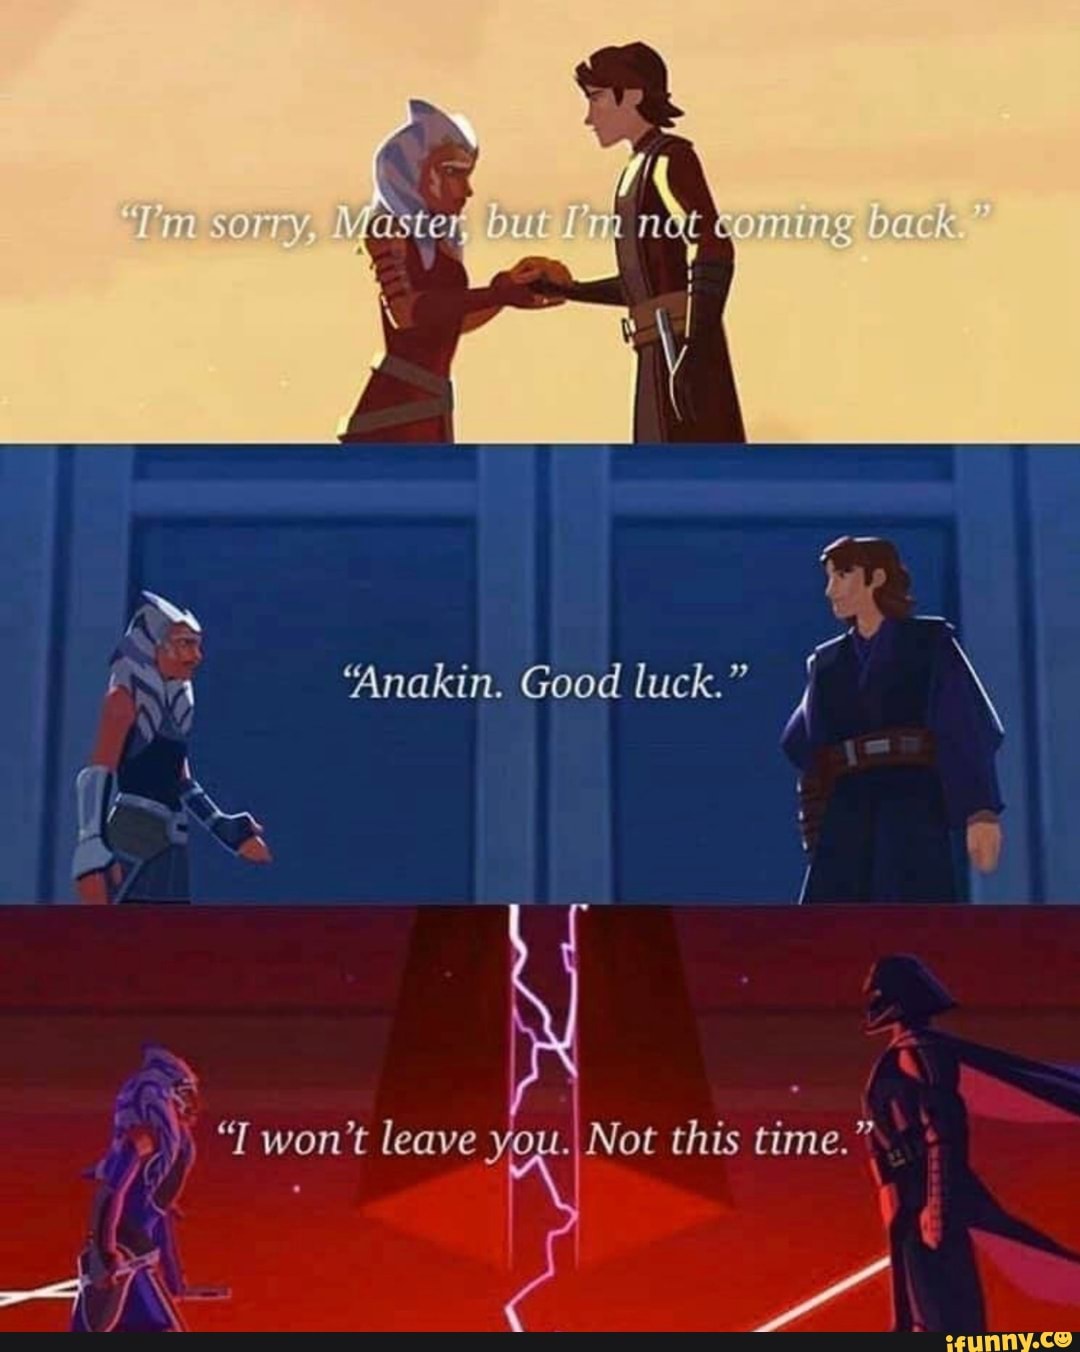 Sorry Master Lomung Anakin Goodluck Back T Won T Leave You Not This Time Ifunny